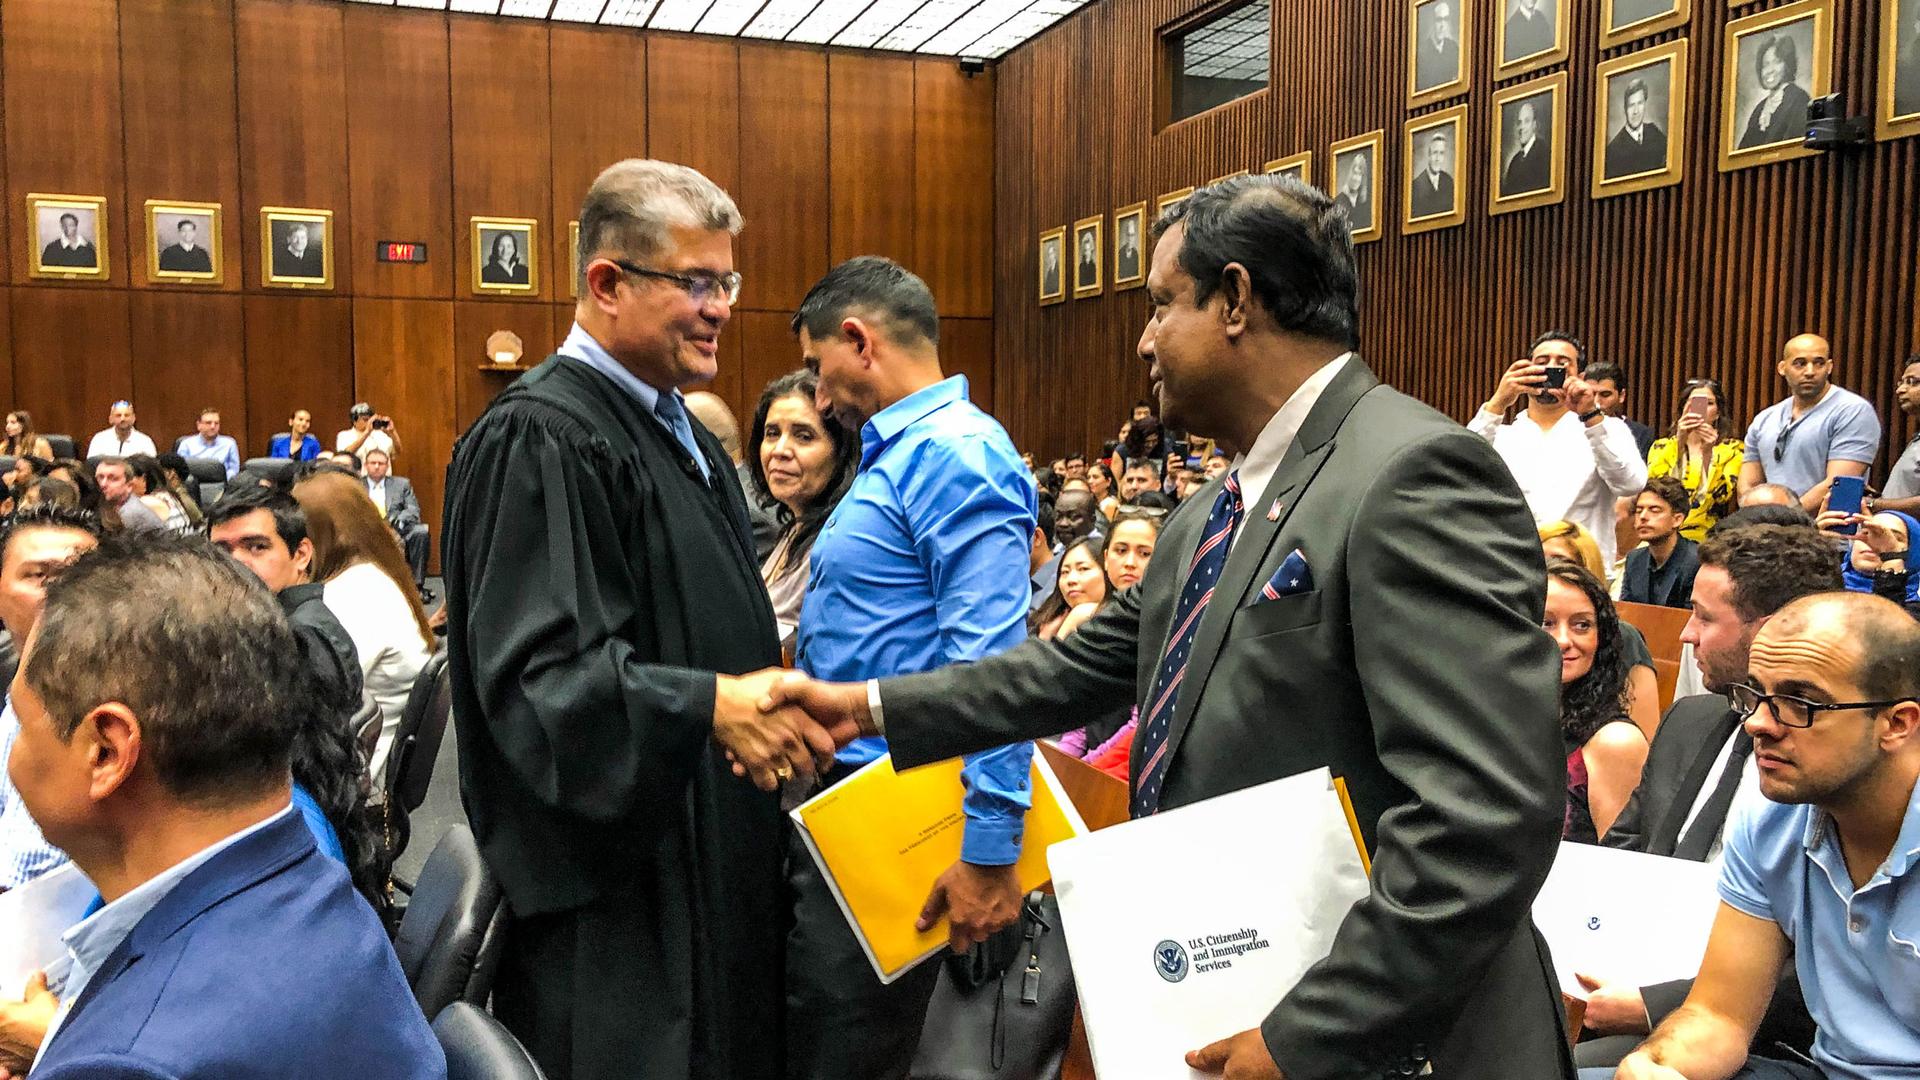 A judge shakes hands with a man at his citizenship ceremony